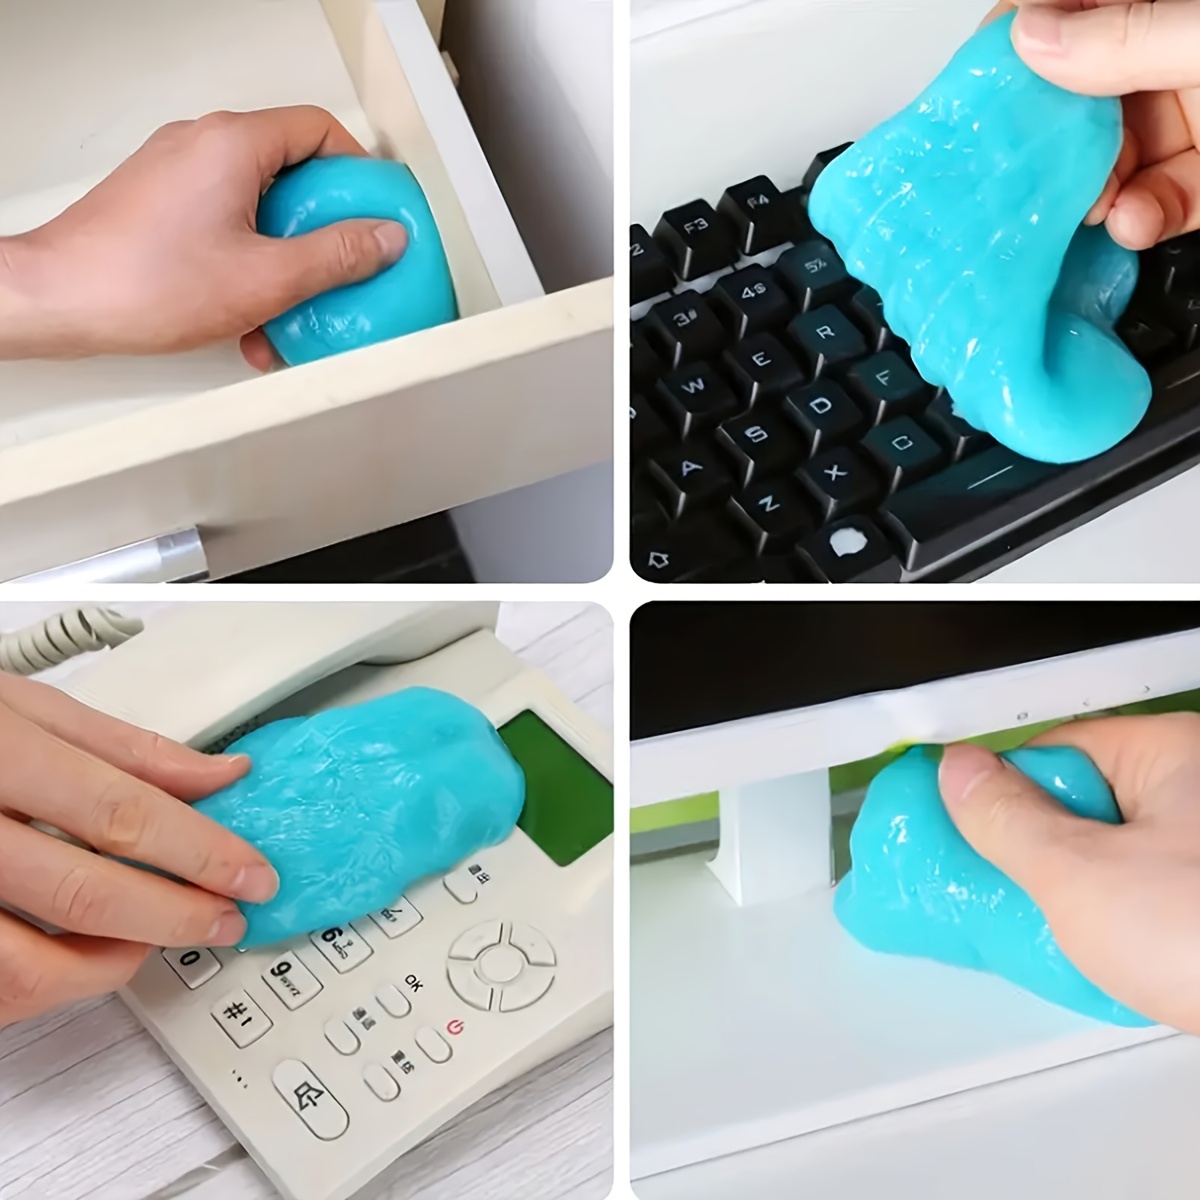 1pc Car Cleaning Gel Slime For Cleaning Tool, Car Vent Magic Dust Remover  Glue, Computer Keyboard Dirt Cleaner, Car Interior Cleaning Accessories Car